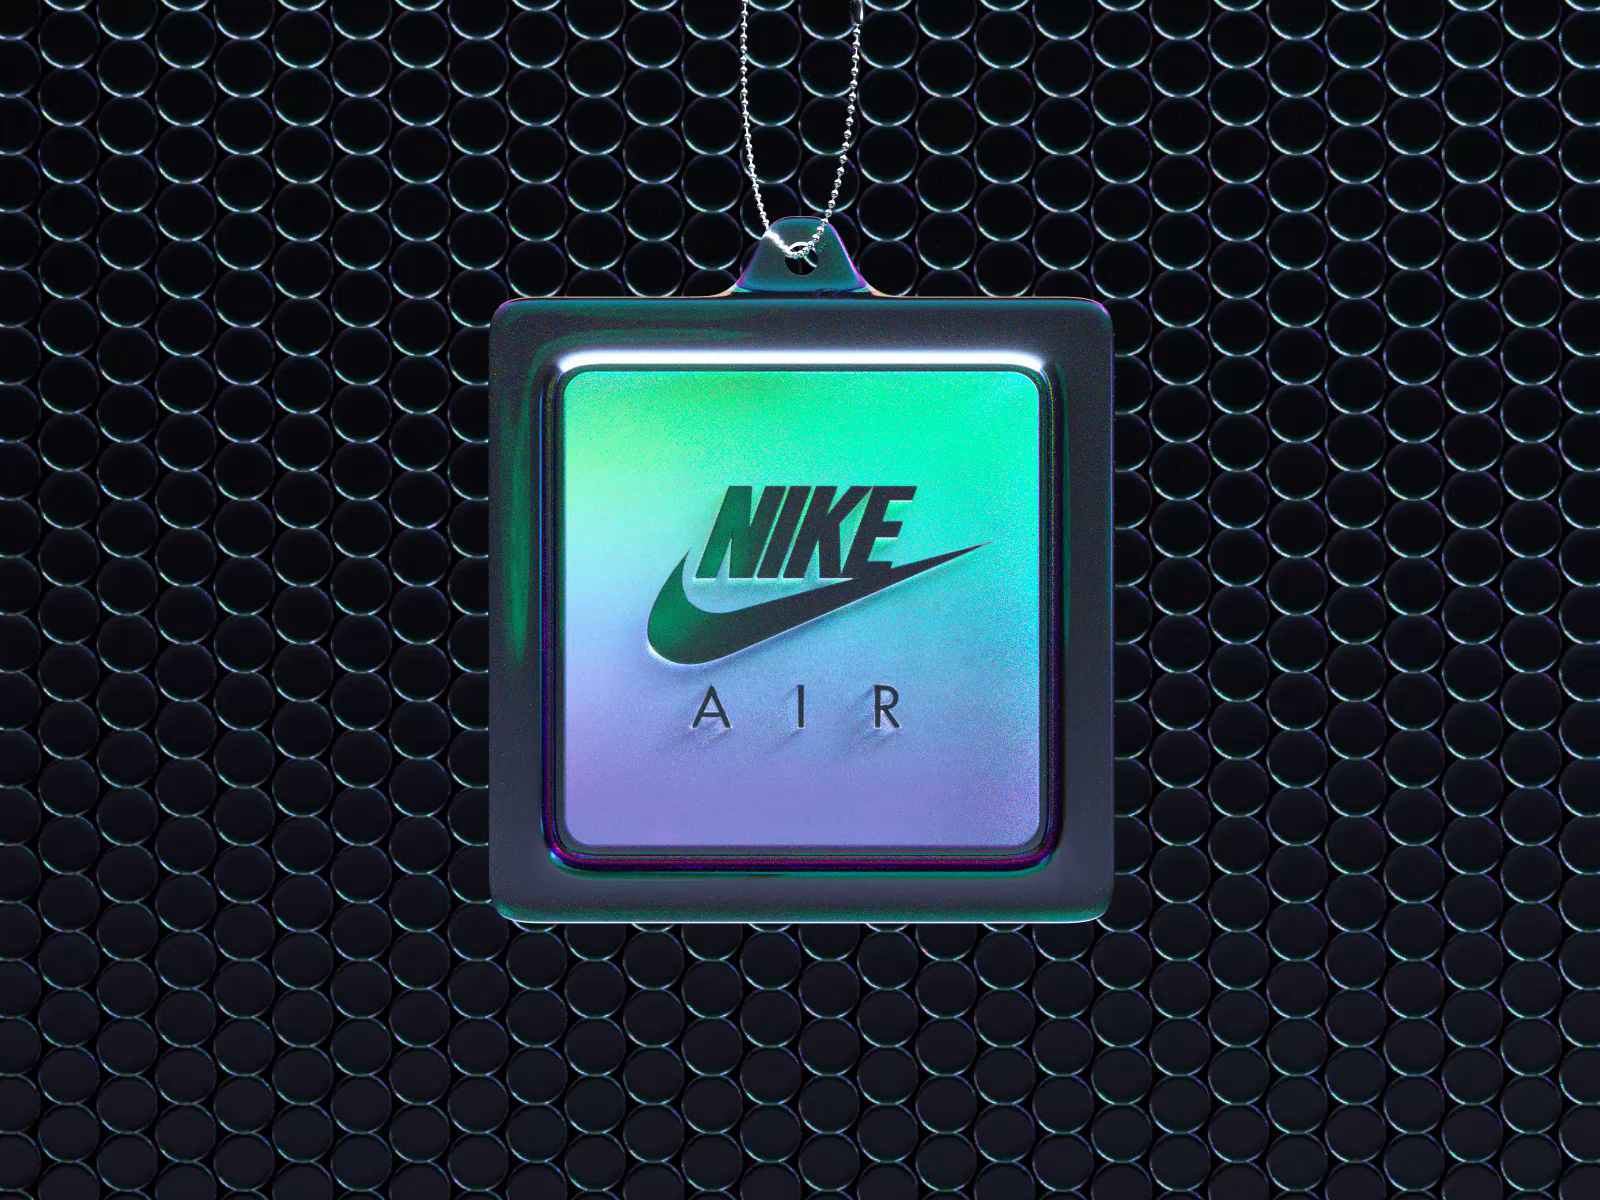 heelal Viva tweede Nike Air Bubble Pack Tag by Nathan Riley for Unseen Studio® on Dribbble